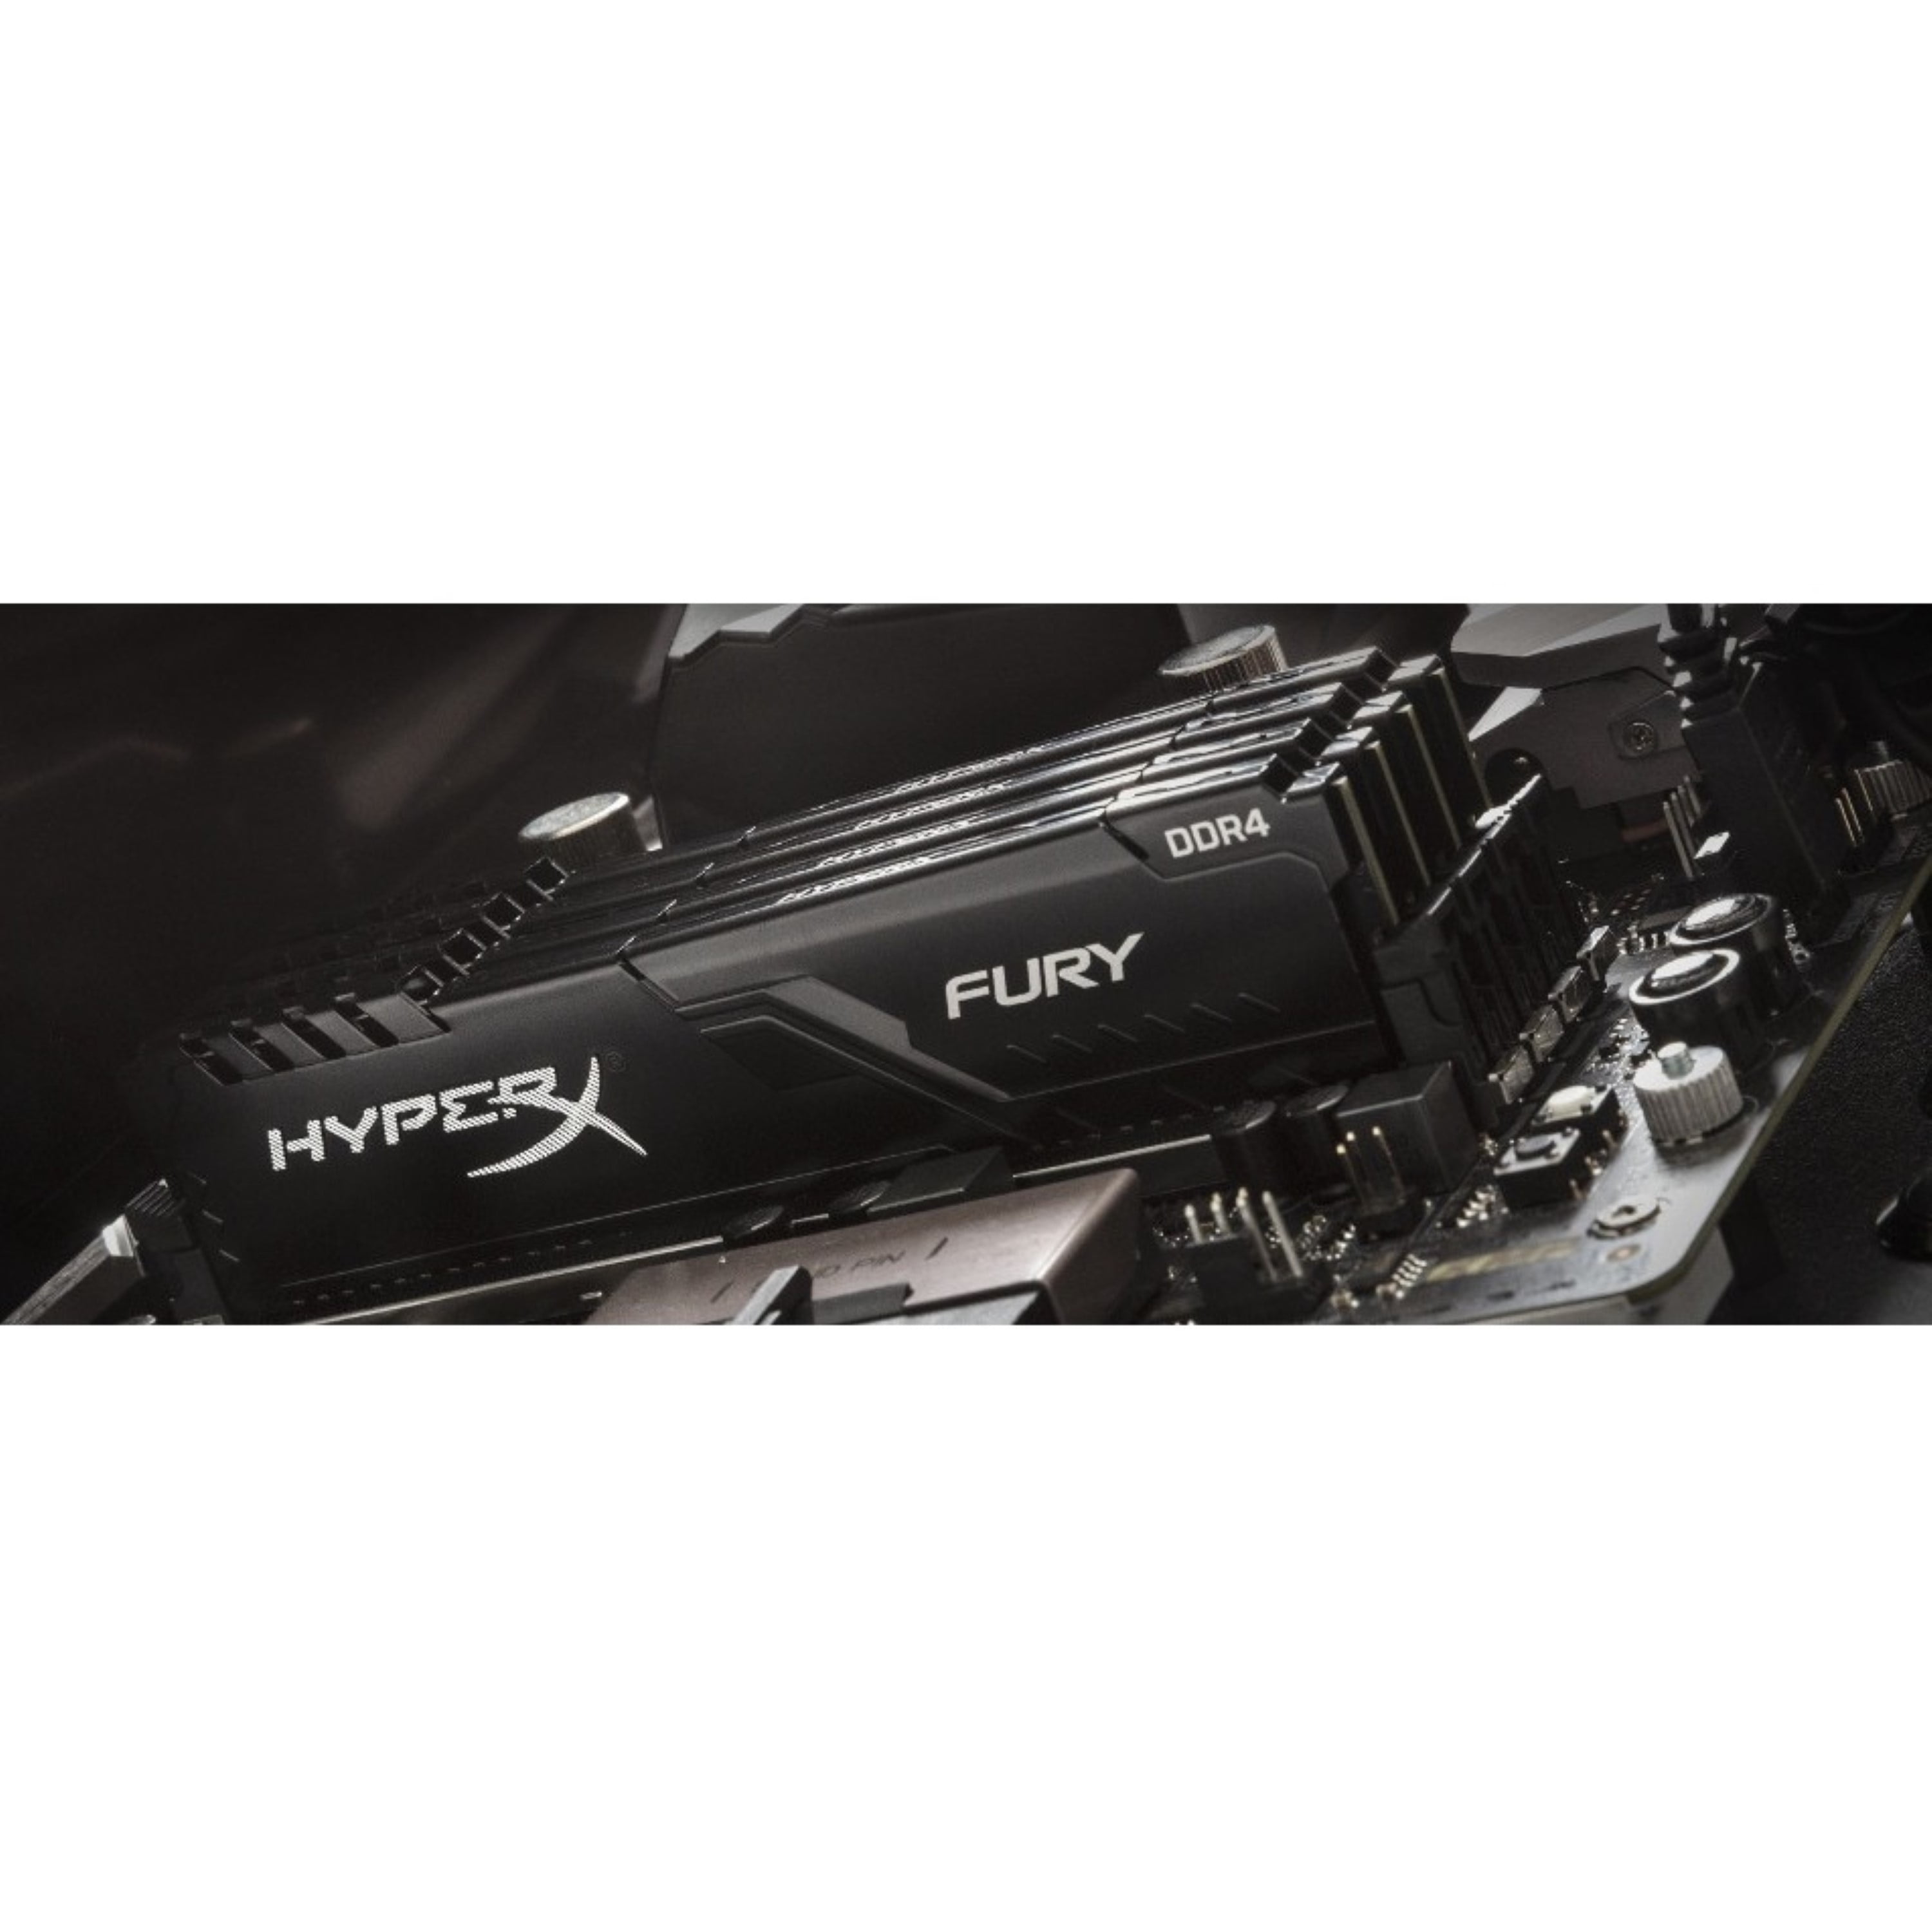 Or either stack appetite HyperX FURY Black 128GB 3466MHz DDR4 CL17 DIMM (Kit of 4) HX434C17FB3K4/128  - Walmart.com